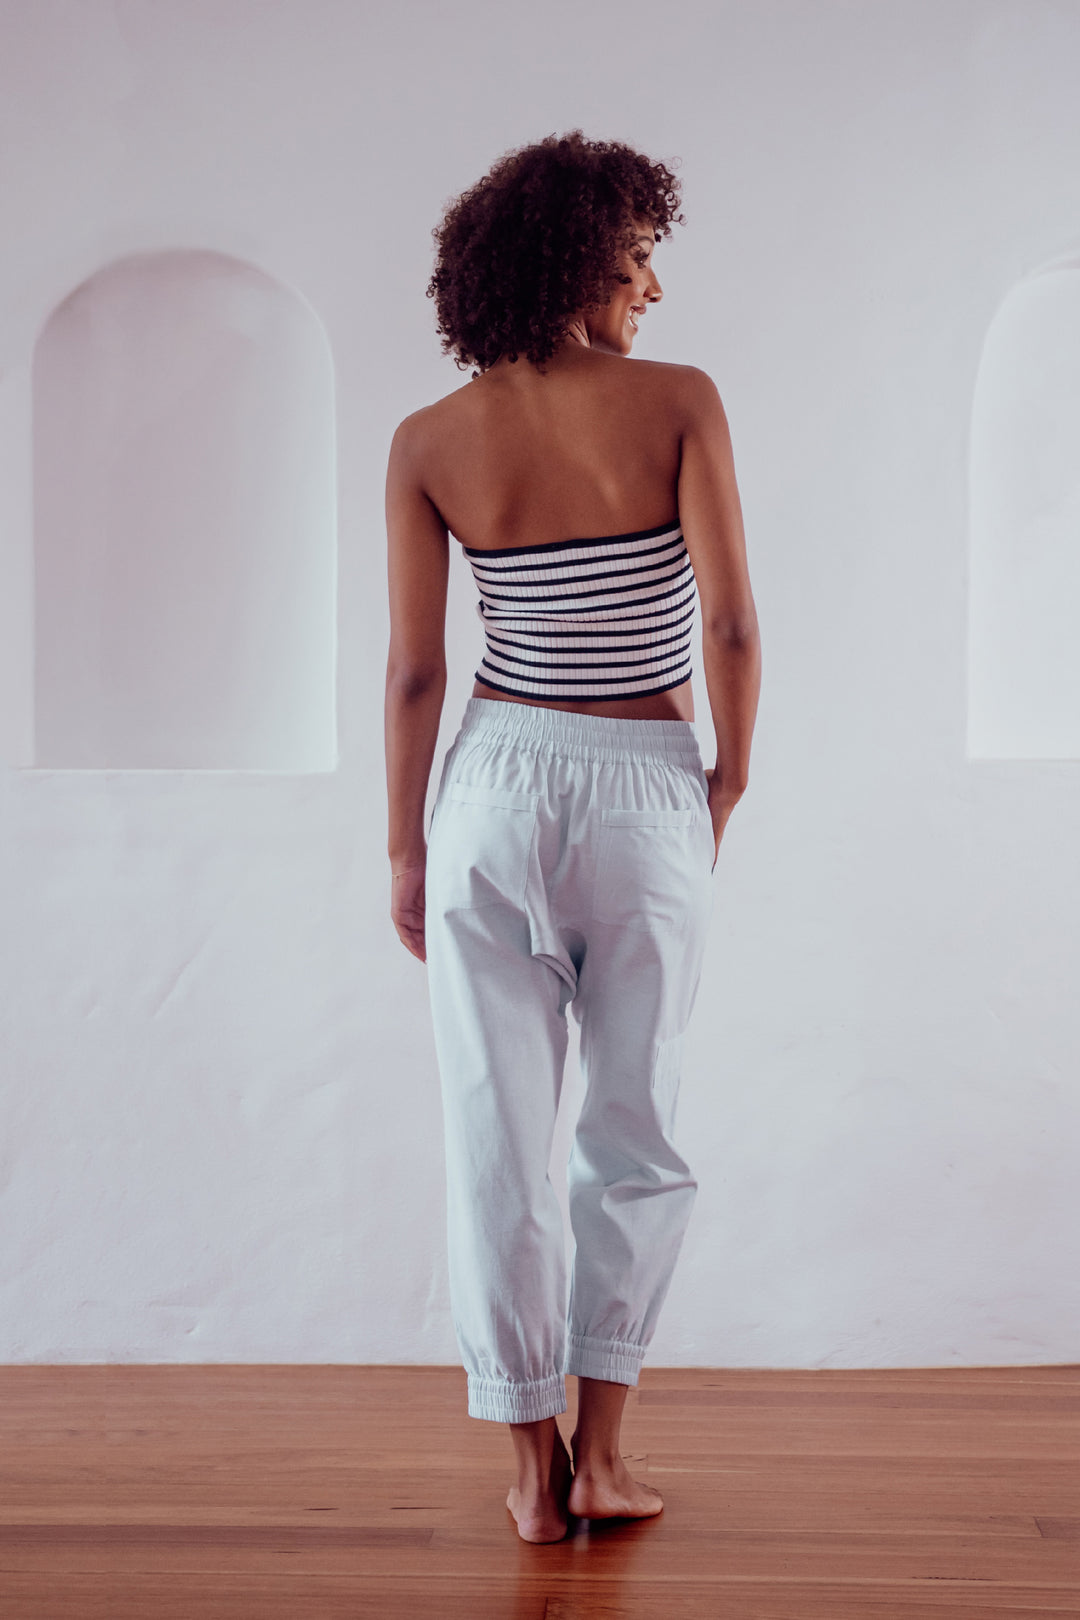 Forget Me Not Chambray Harem Pant